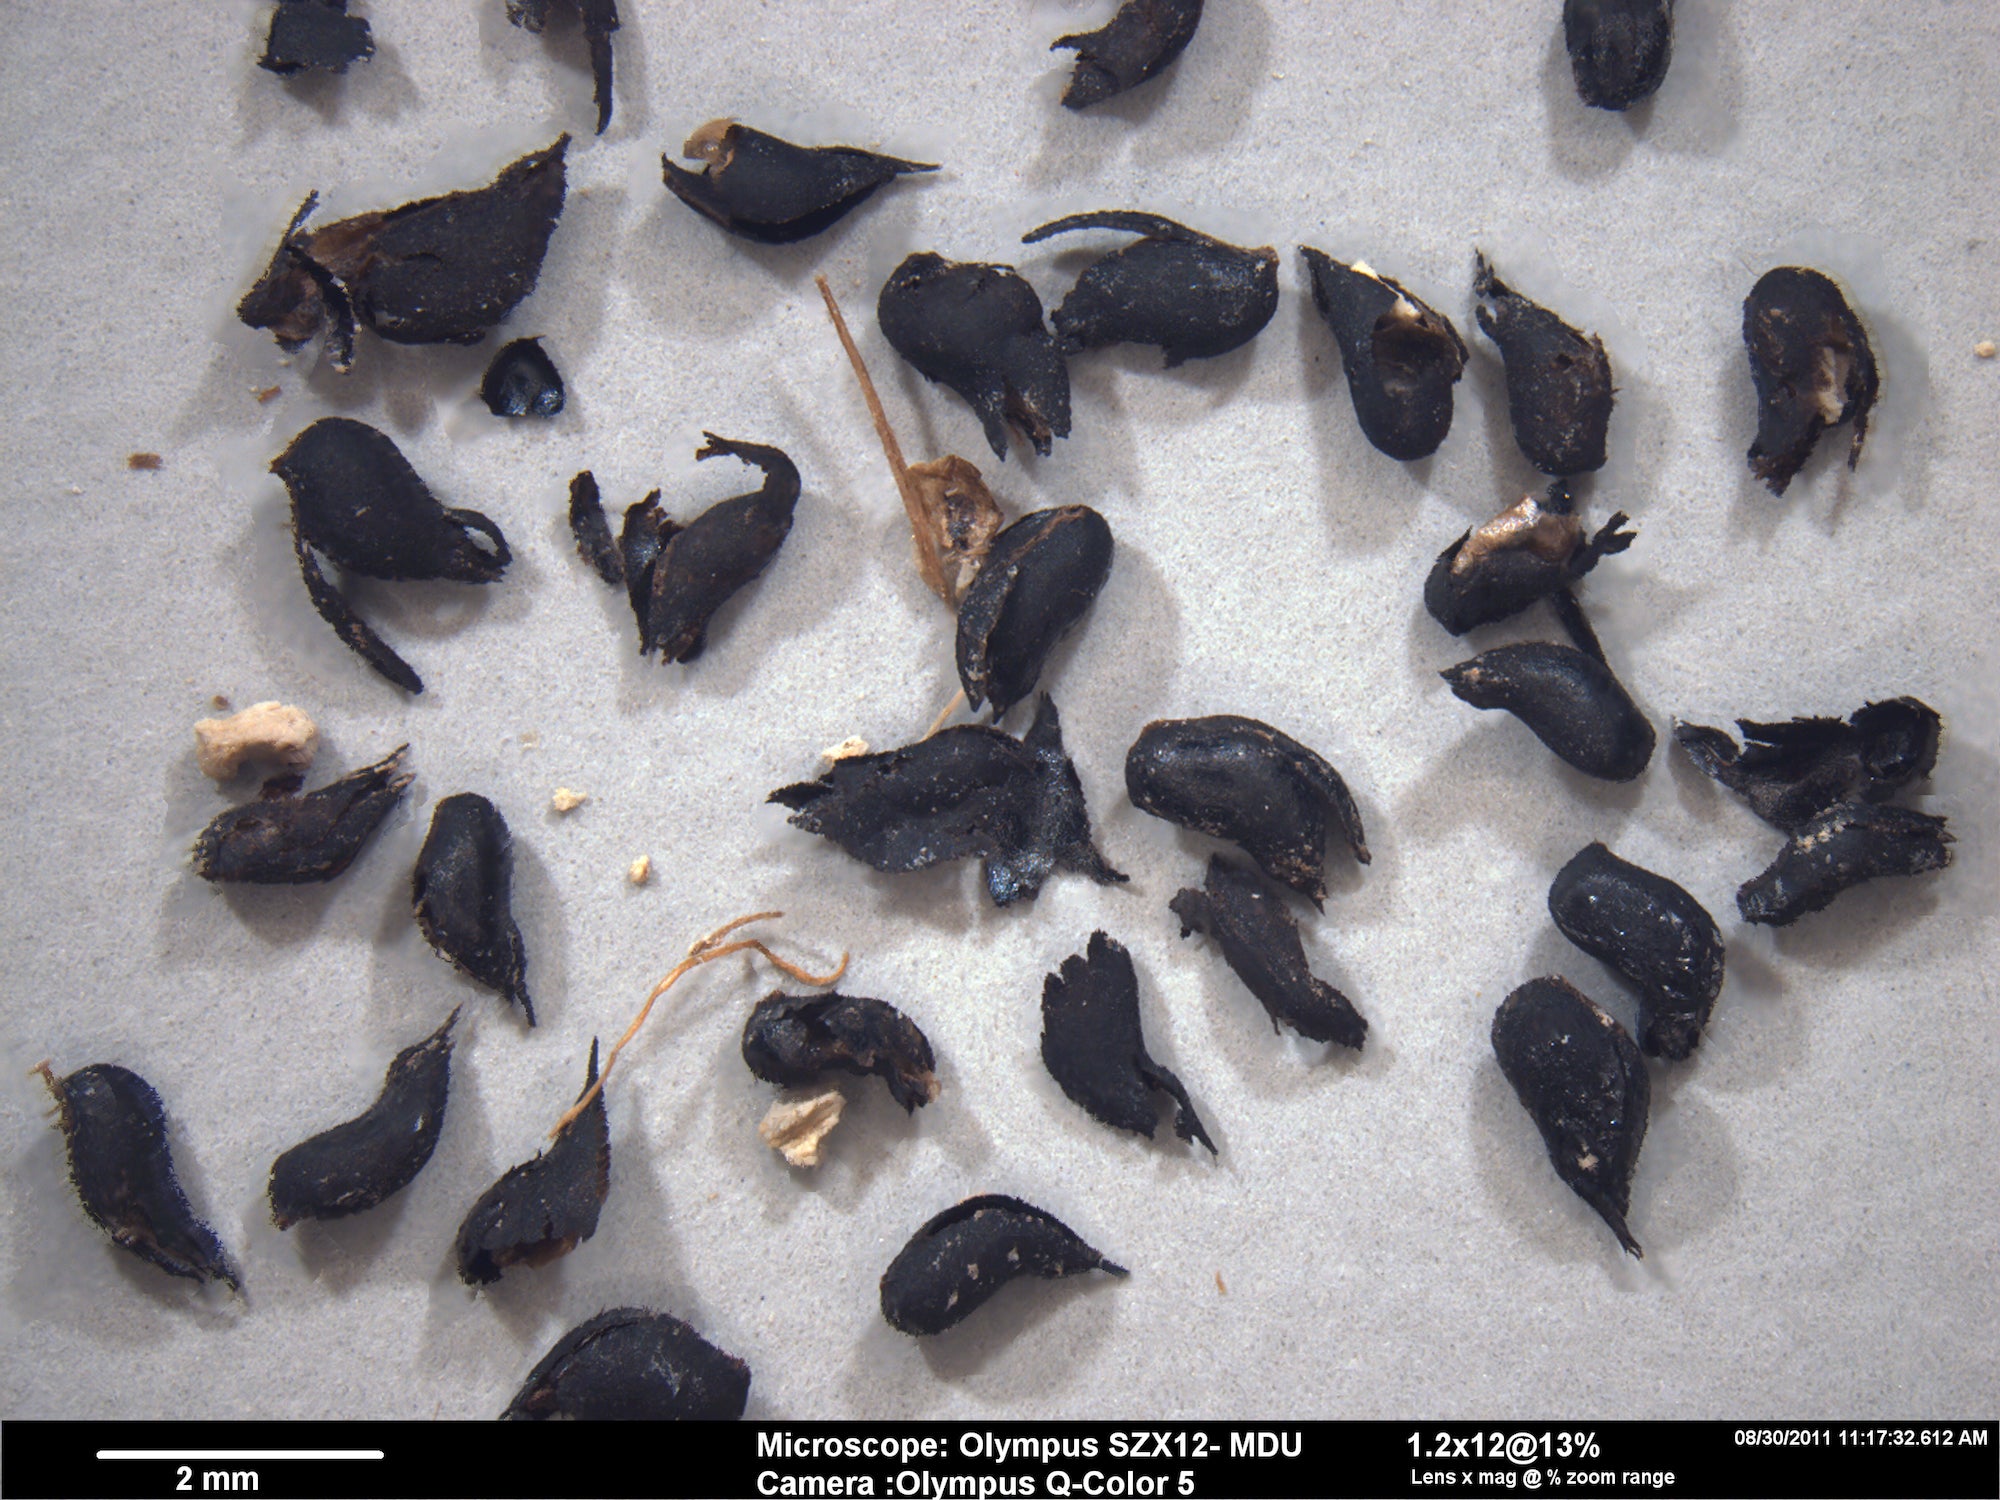 The seeds used for dating the footprints (Photo: National Park Service, USGS, and Bournemouth University)